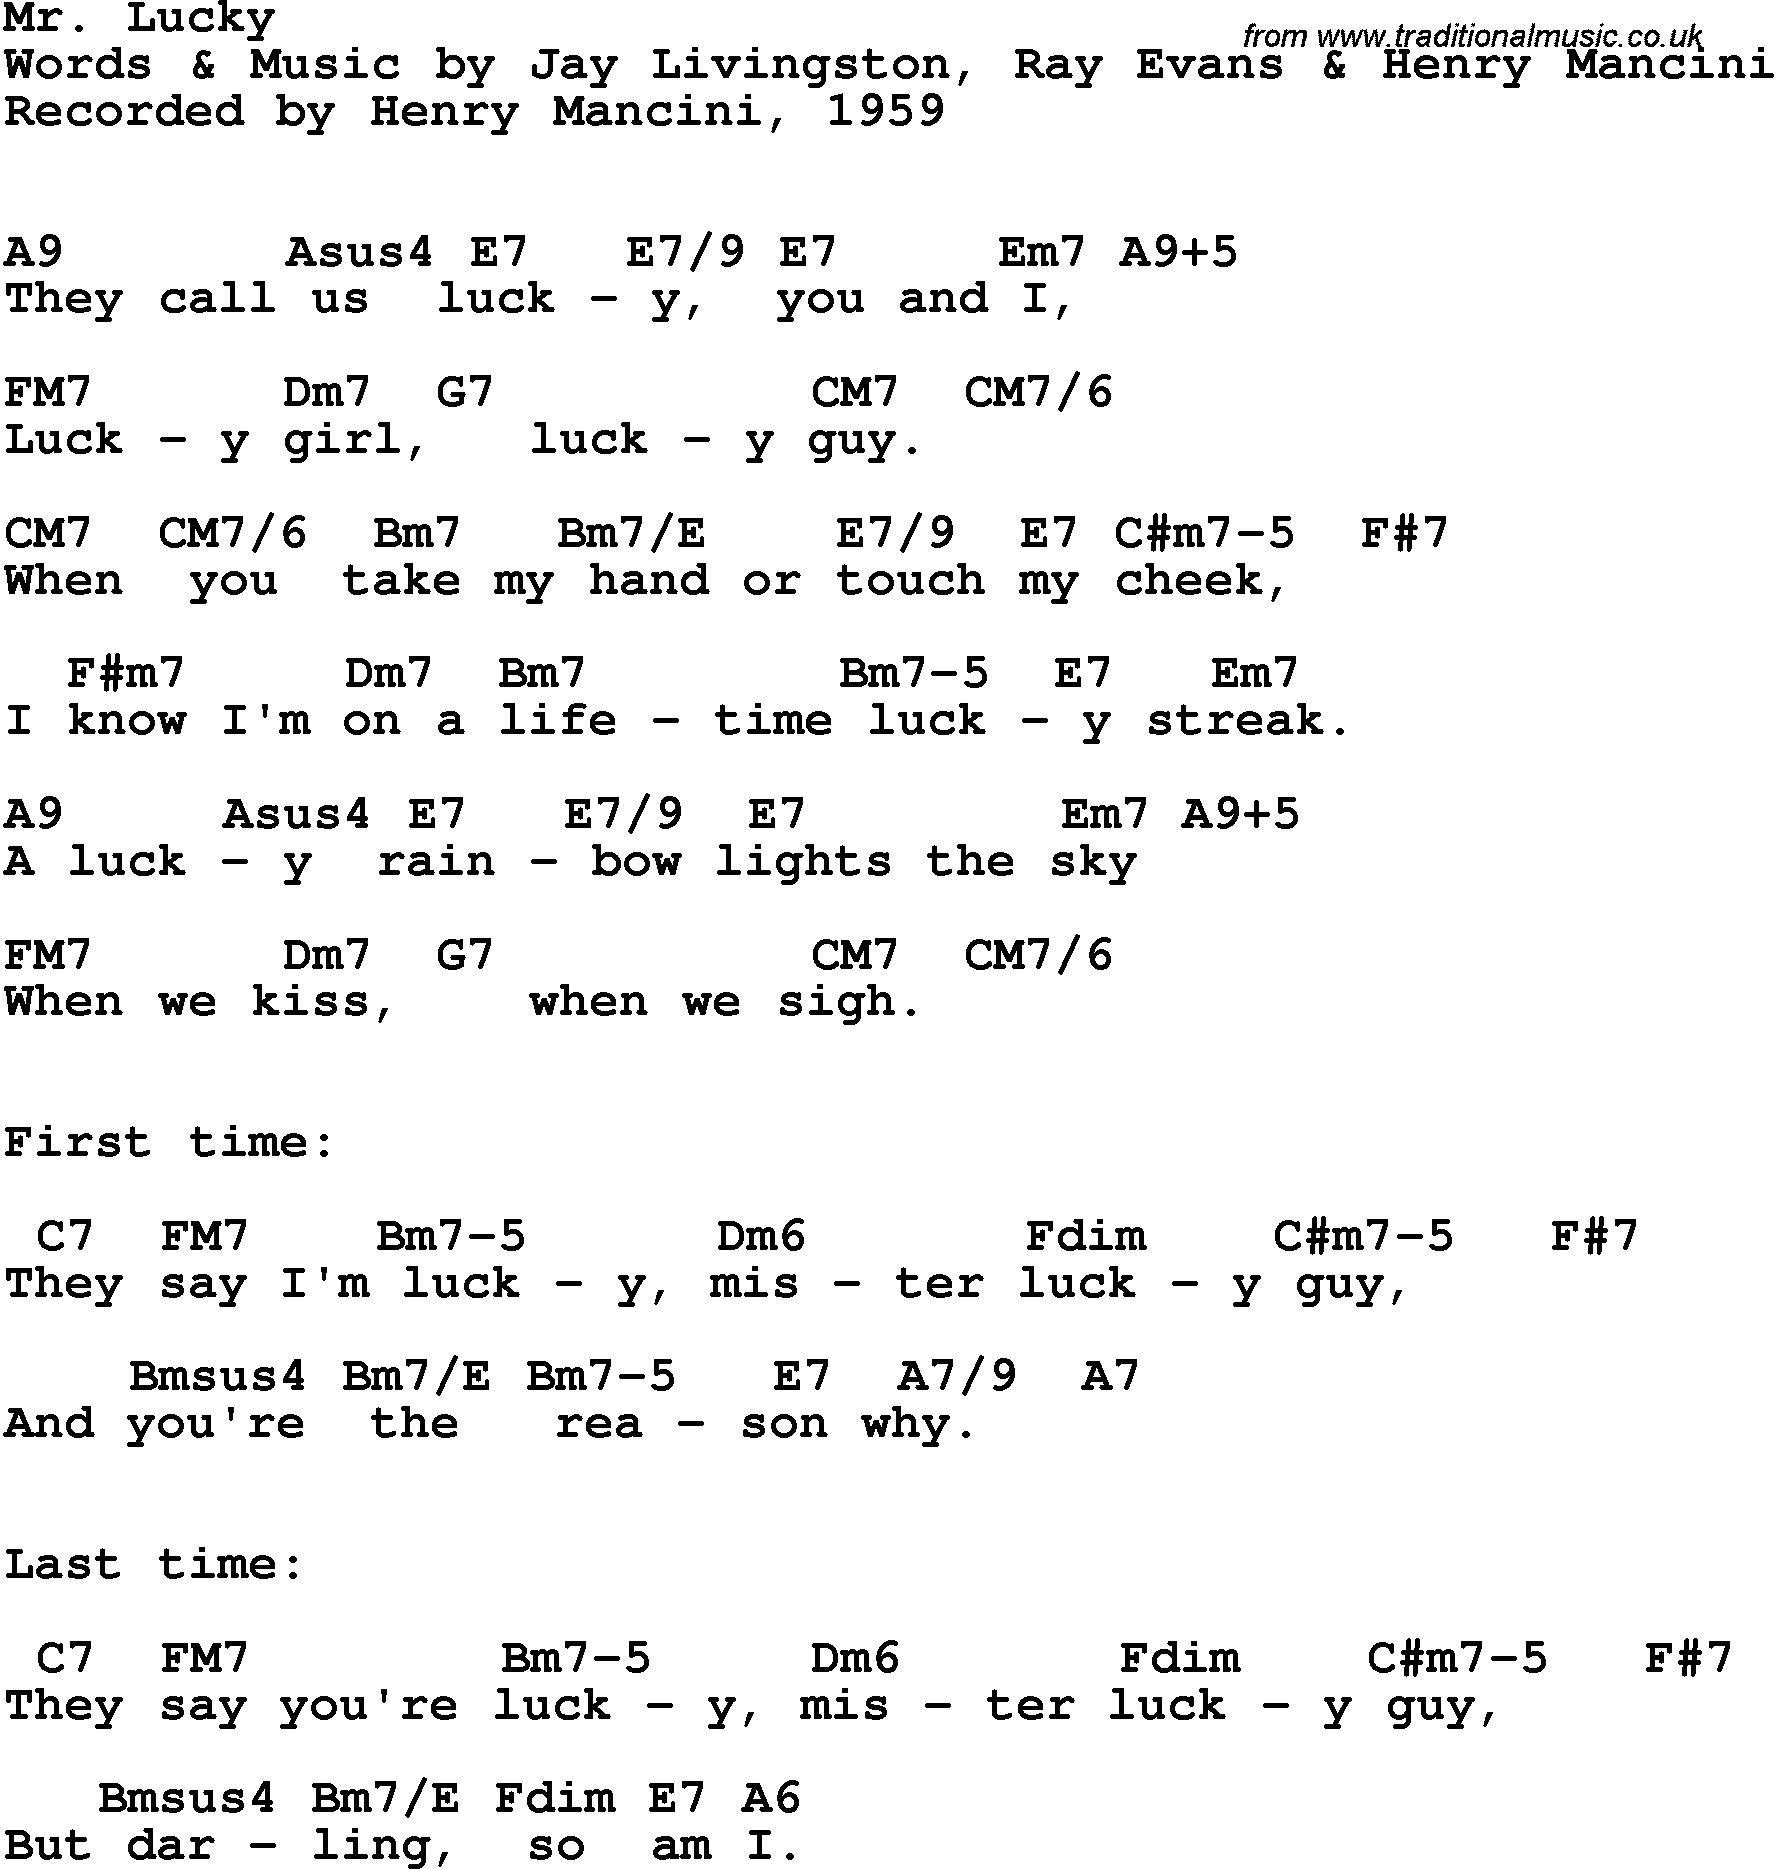 Song Lyrics with guitar chords for Mr Lucky - Henry Mancini, 1959